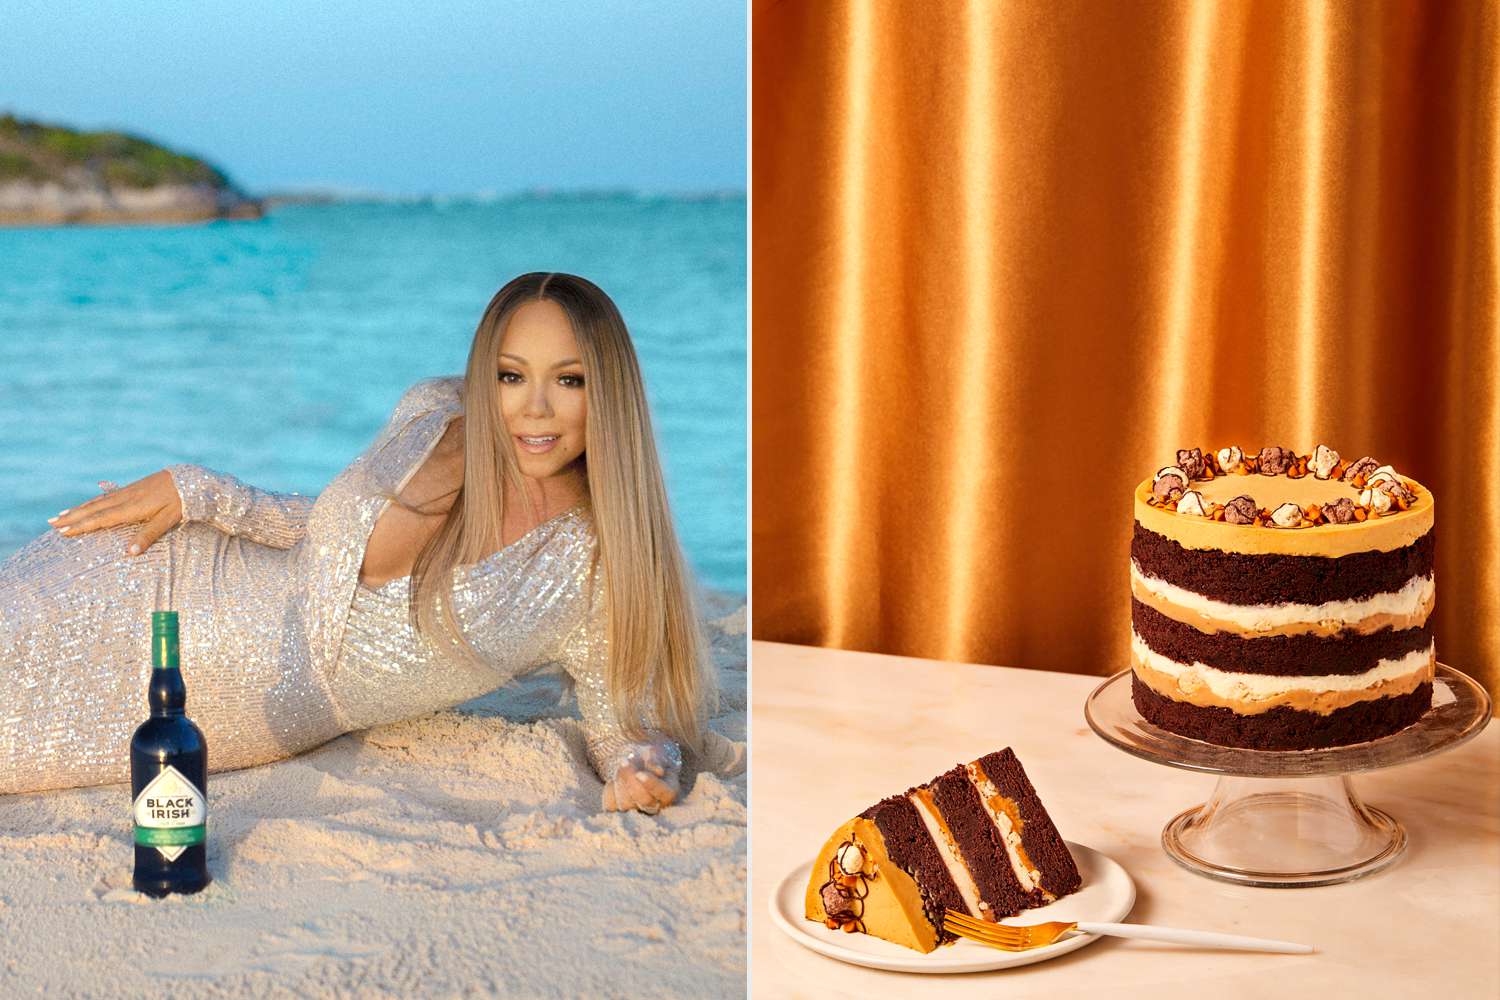 Mariah Carey Partners with Milk Bar on a Double Chocolate Caramel Cake Available Today Only - PEOPLE.com